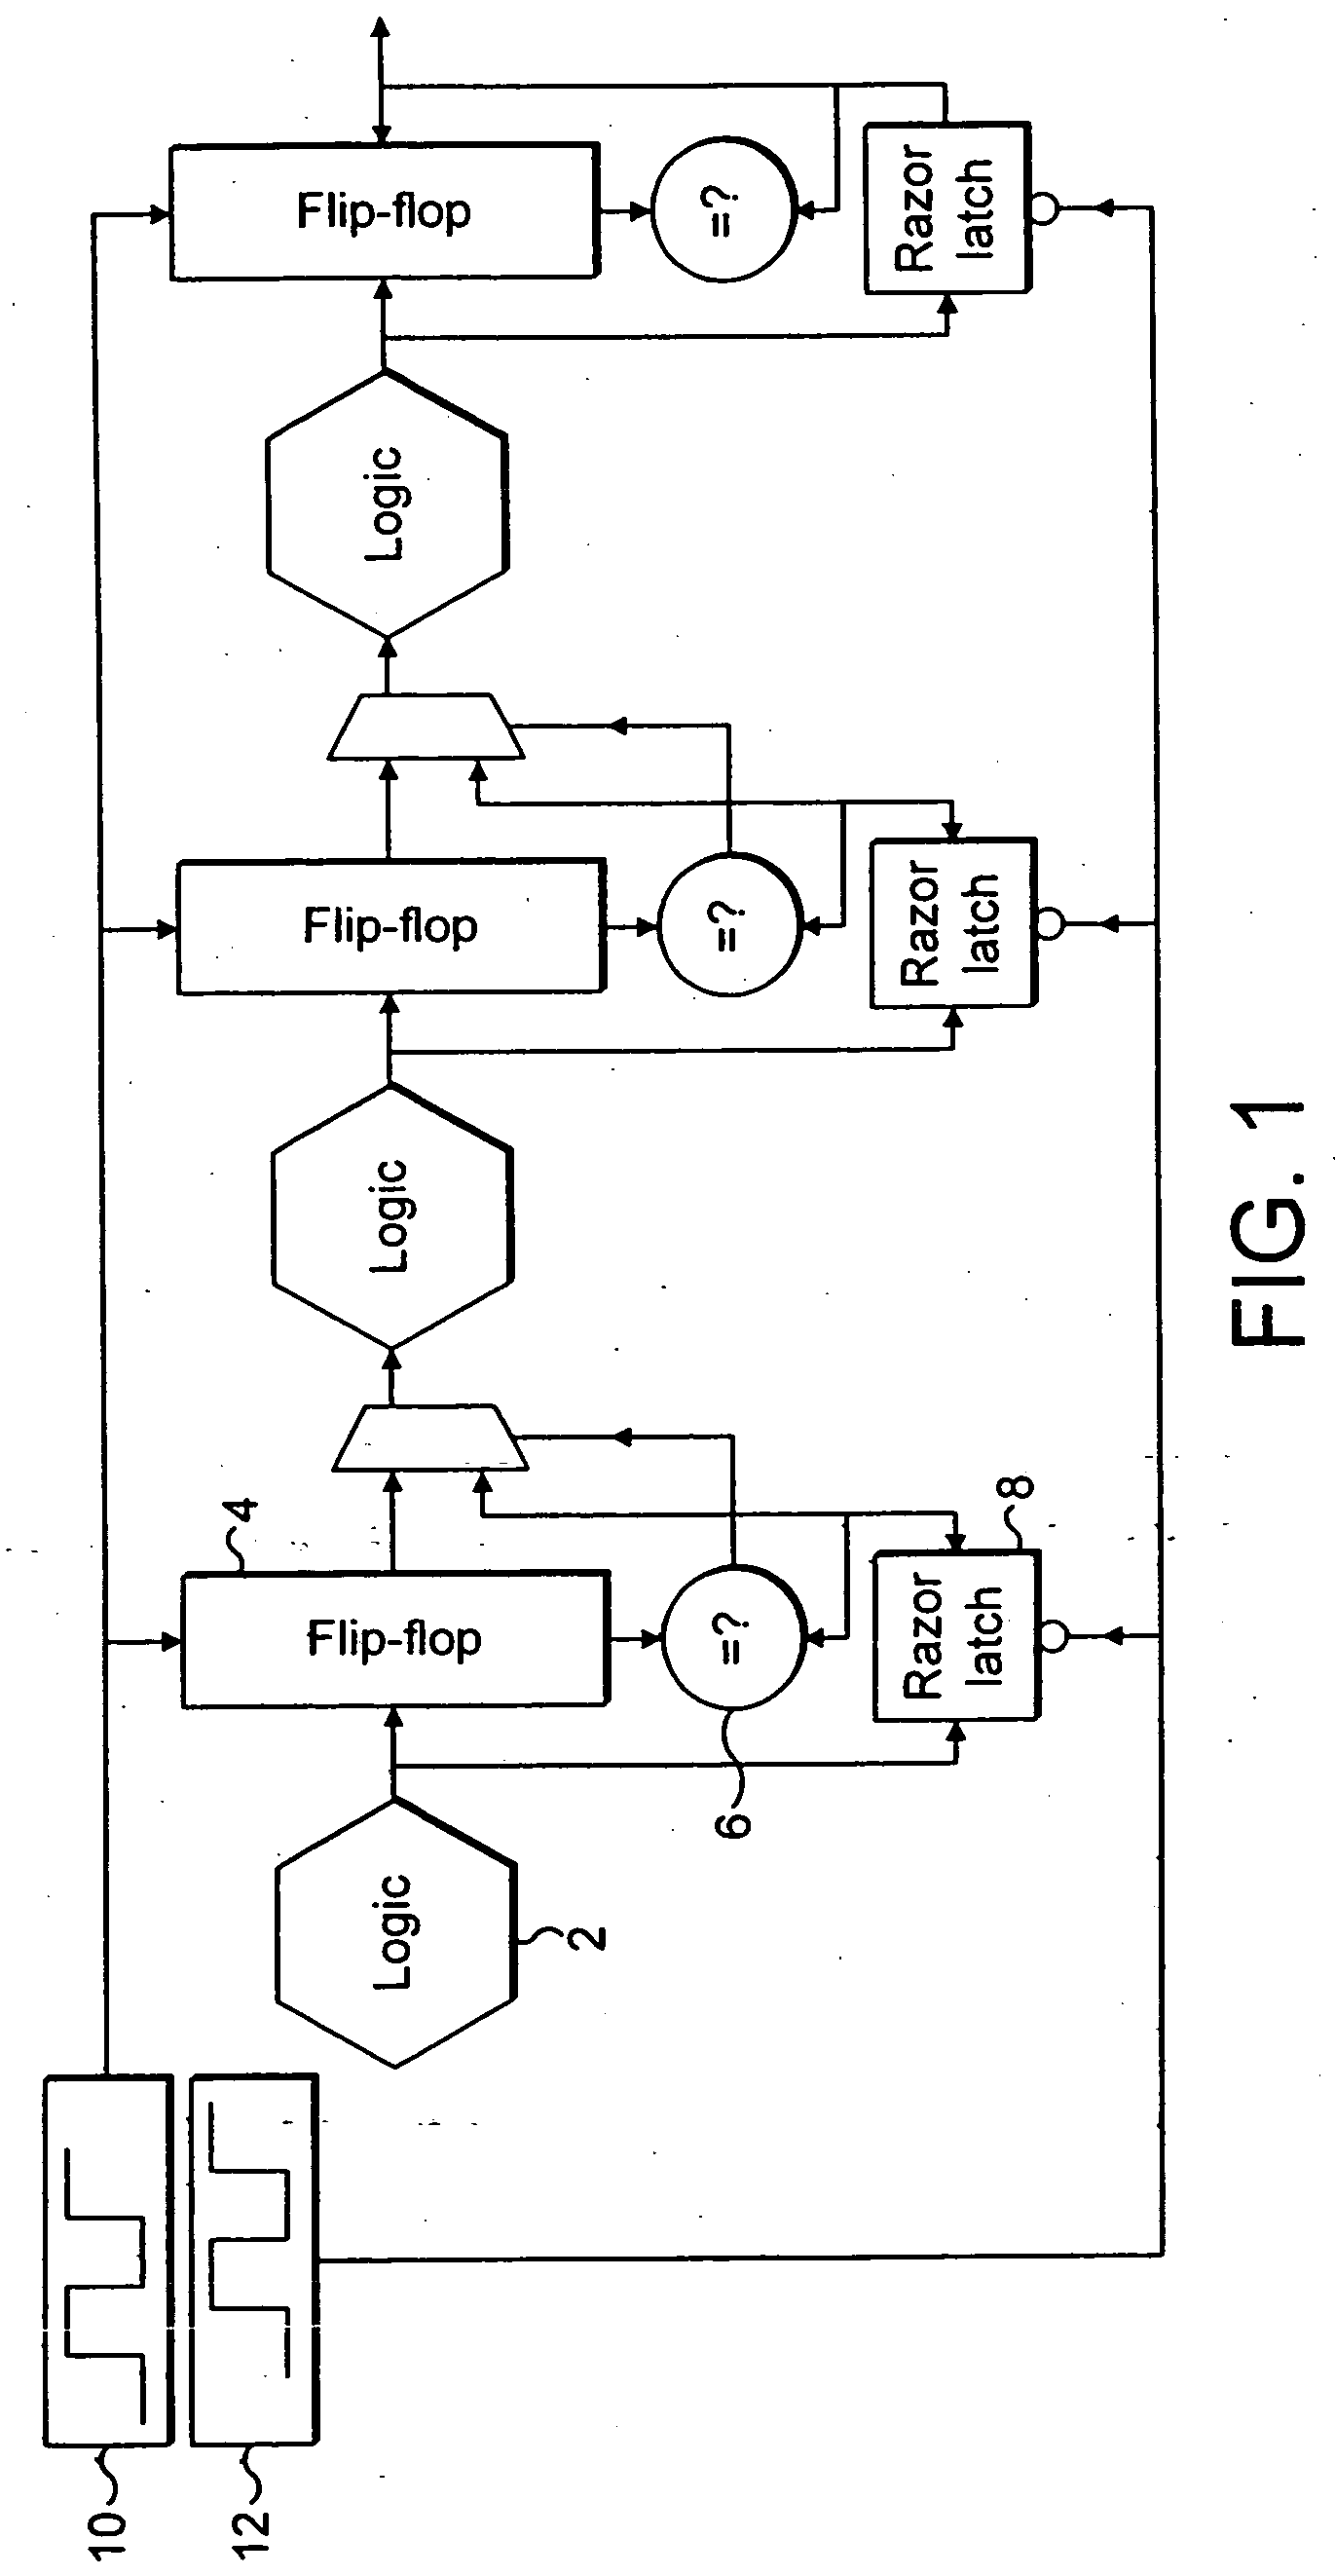 Error recovery within processing stages of an integrated circuit